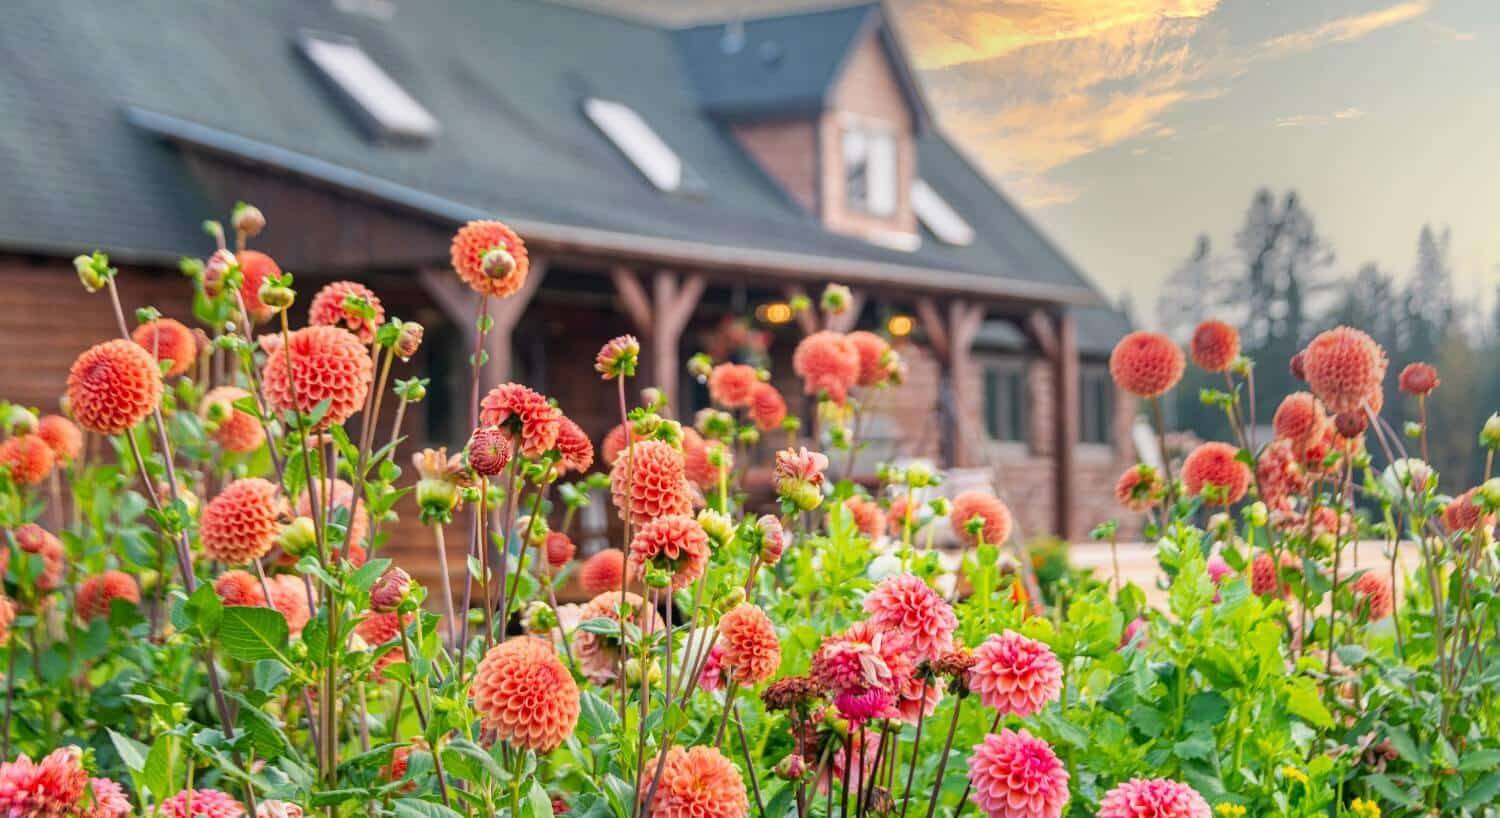 Many beautiful orange dahlia flowers in front of a porch